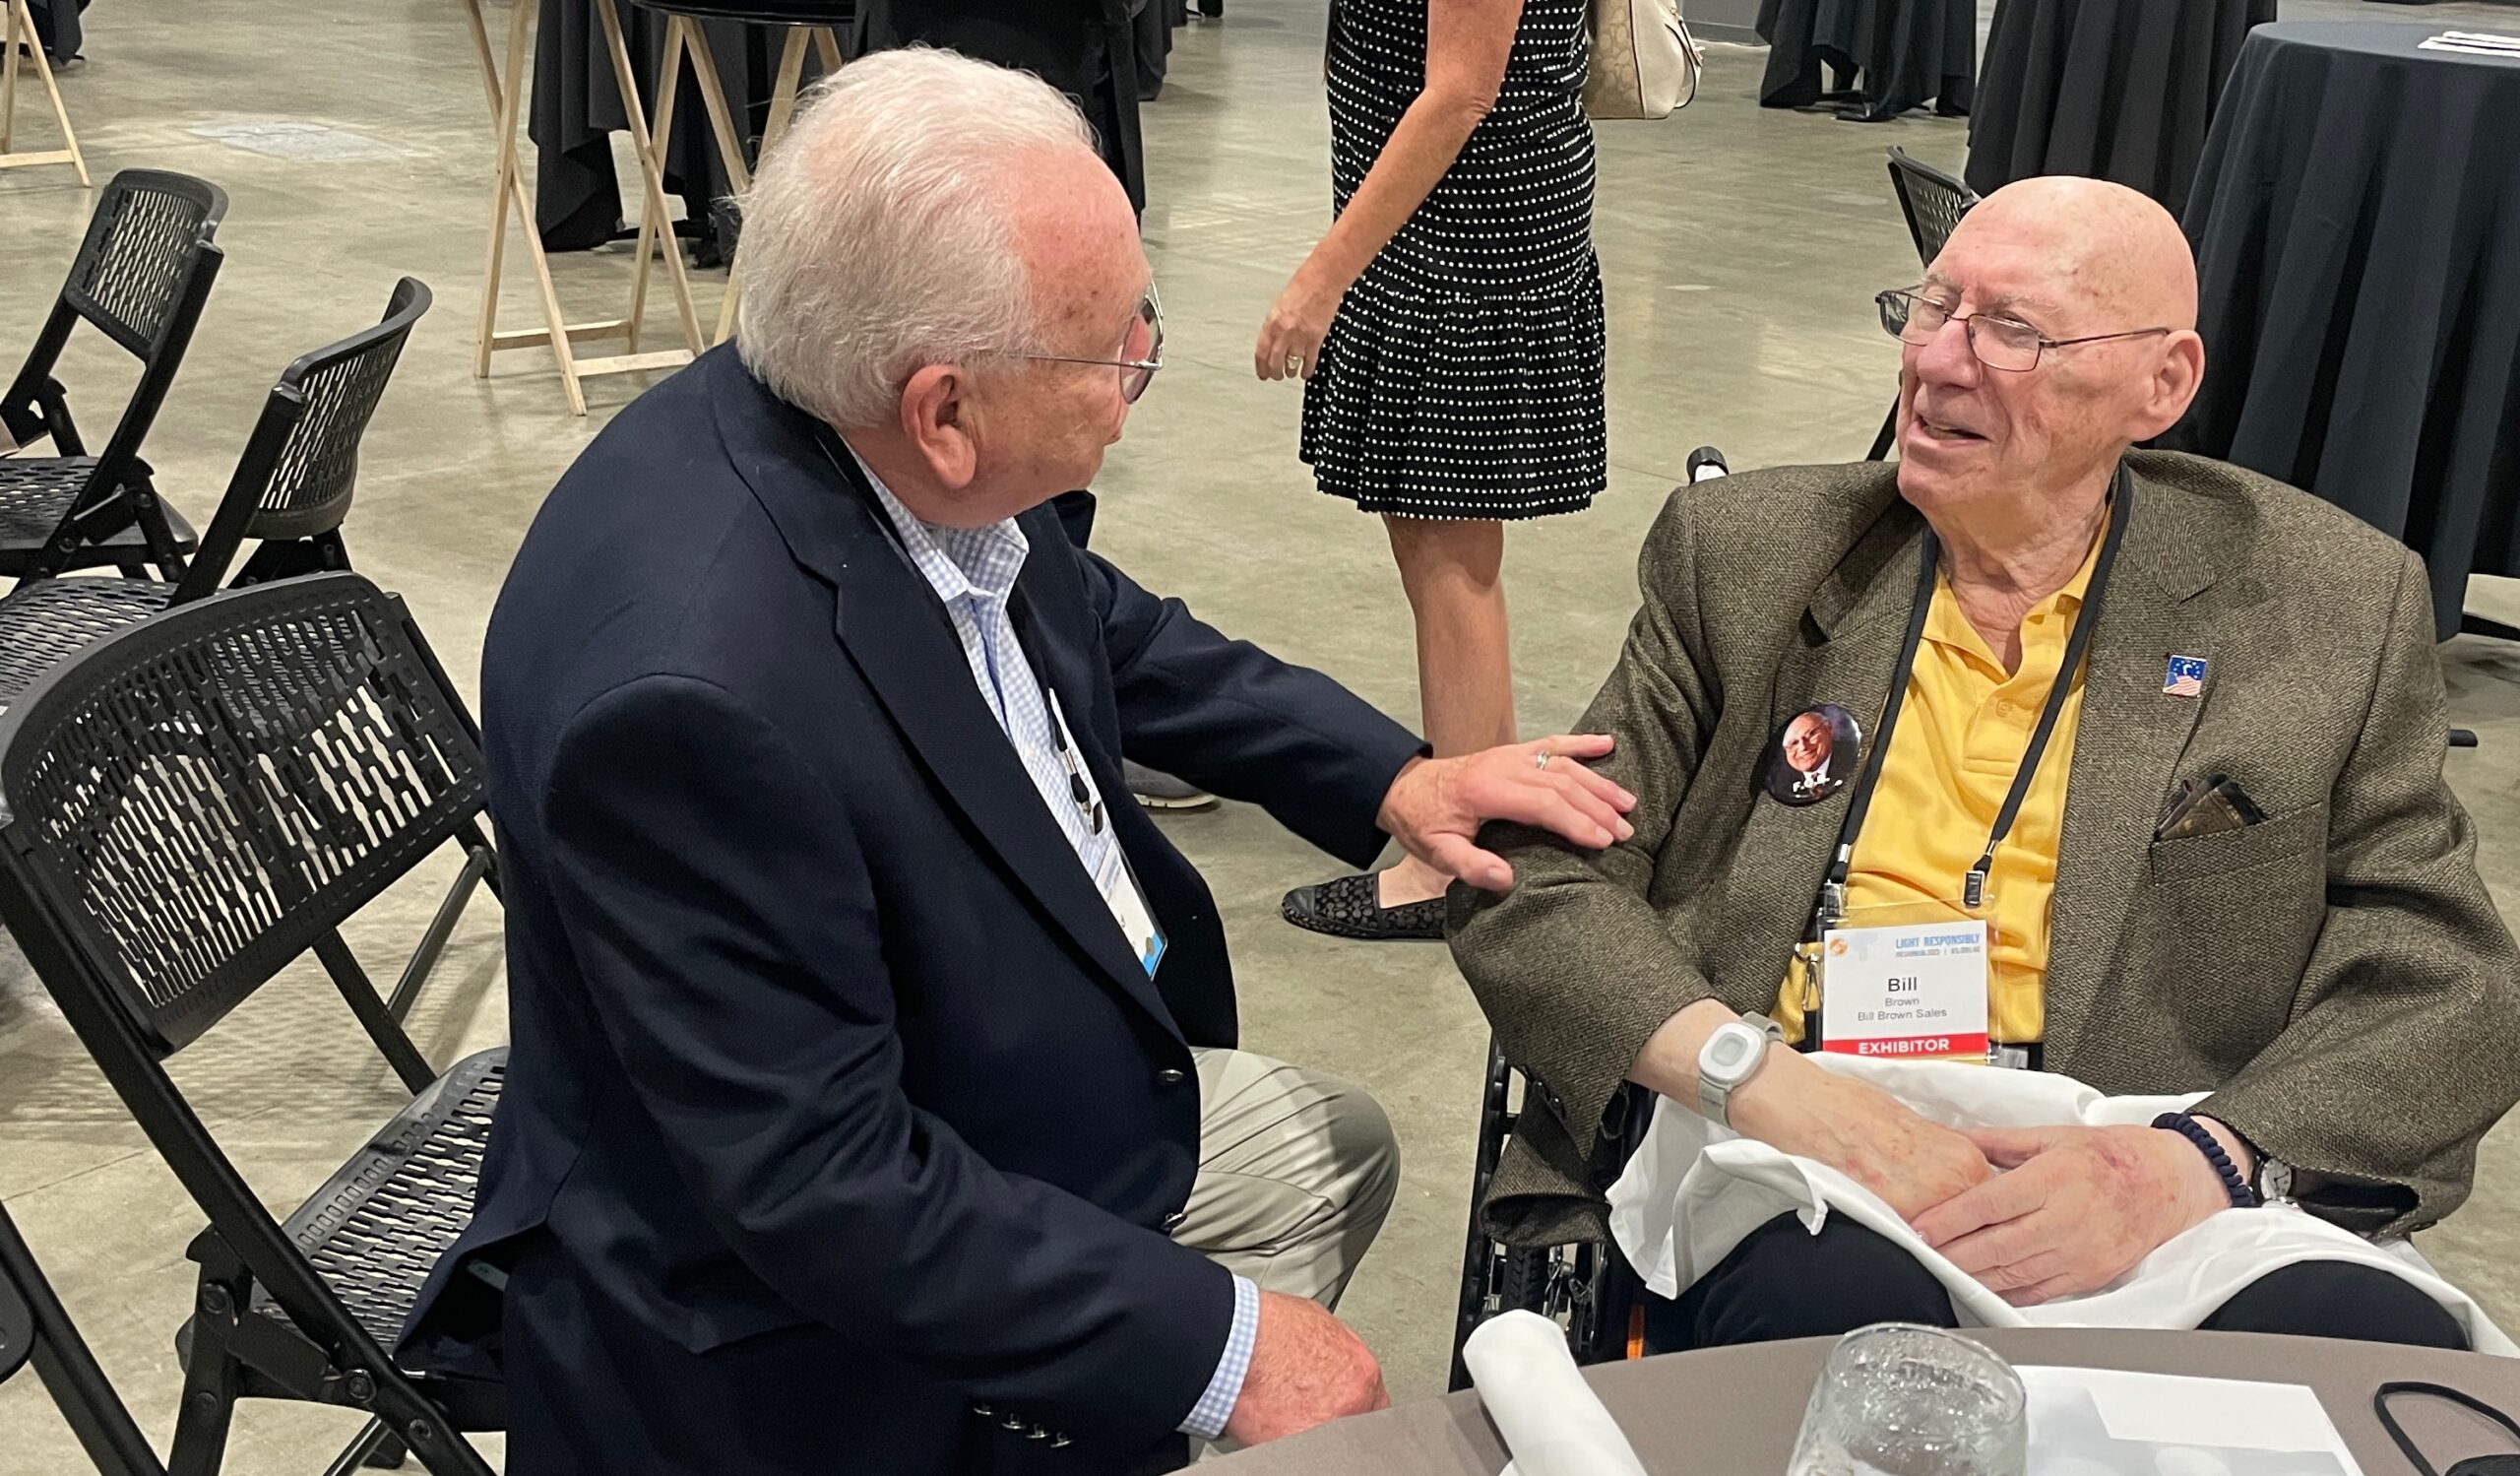 Richard Wyton visits with Bill Brown at the IES Annual Conference